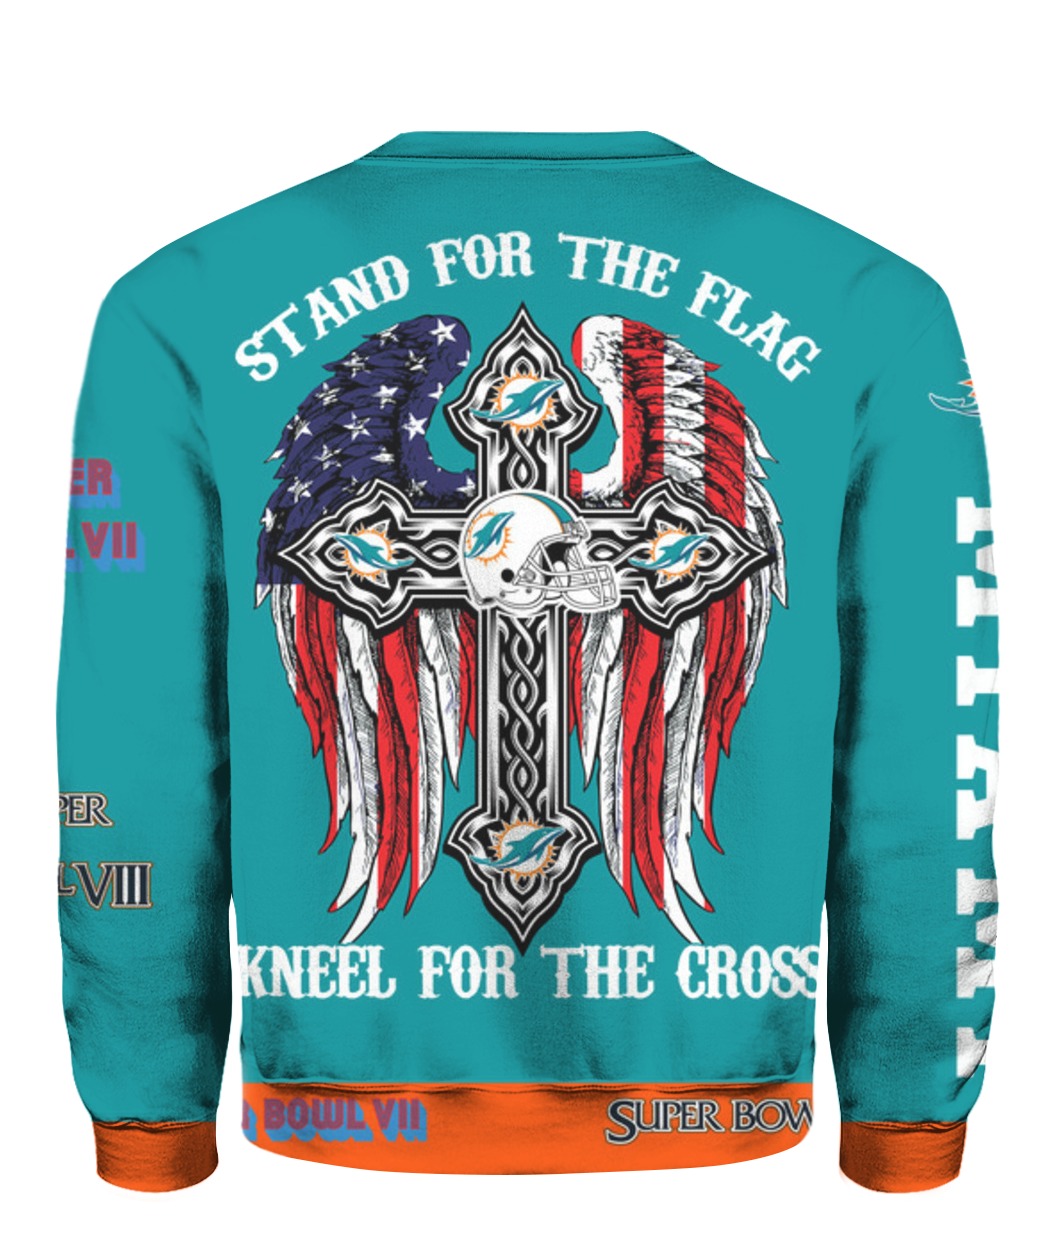 Stand for the flag kneel for the cross miami dolphins all over print sweatshirt - back